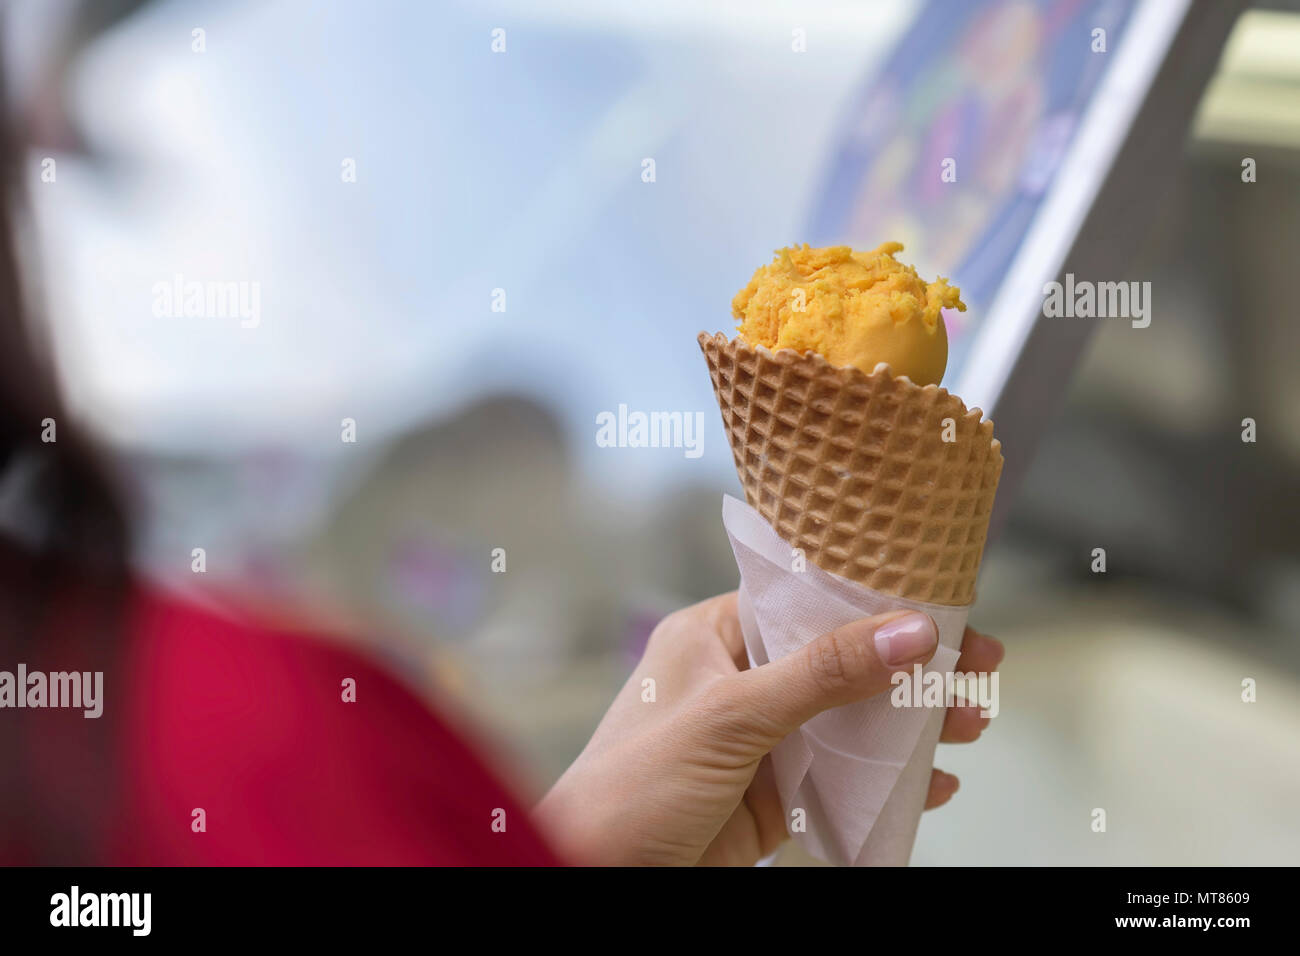 Ball of fruit ice cream orange color in waffle cone, Female hand. Popular delicacies for adults and children. Selective focus. Real scene Stock Photo